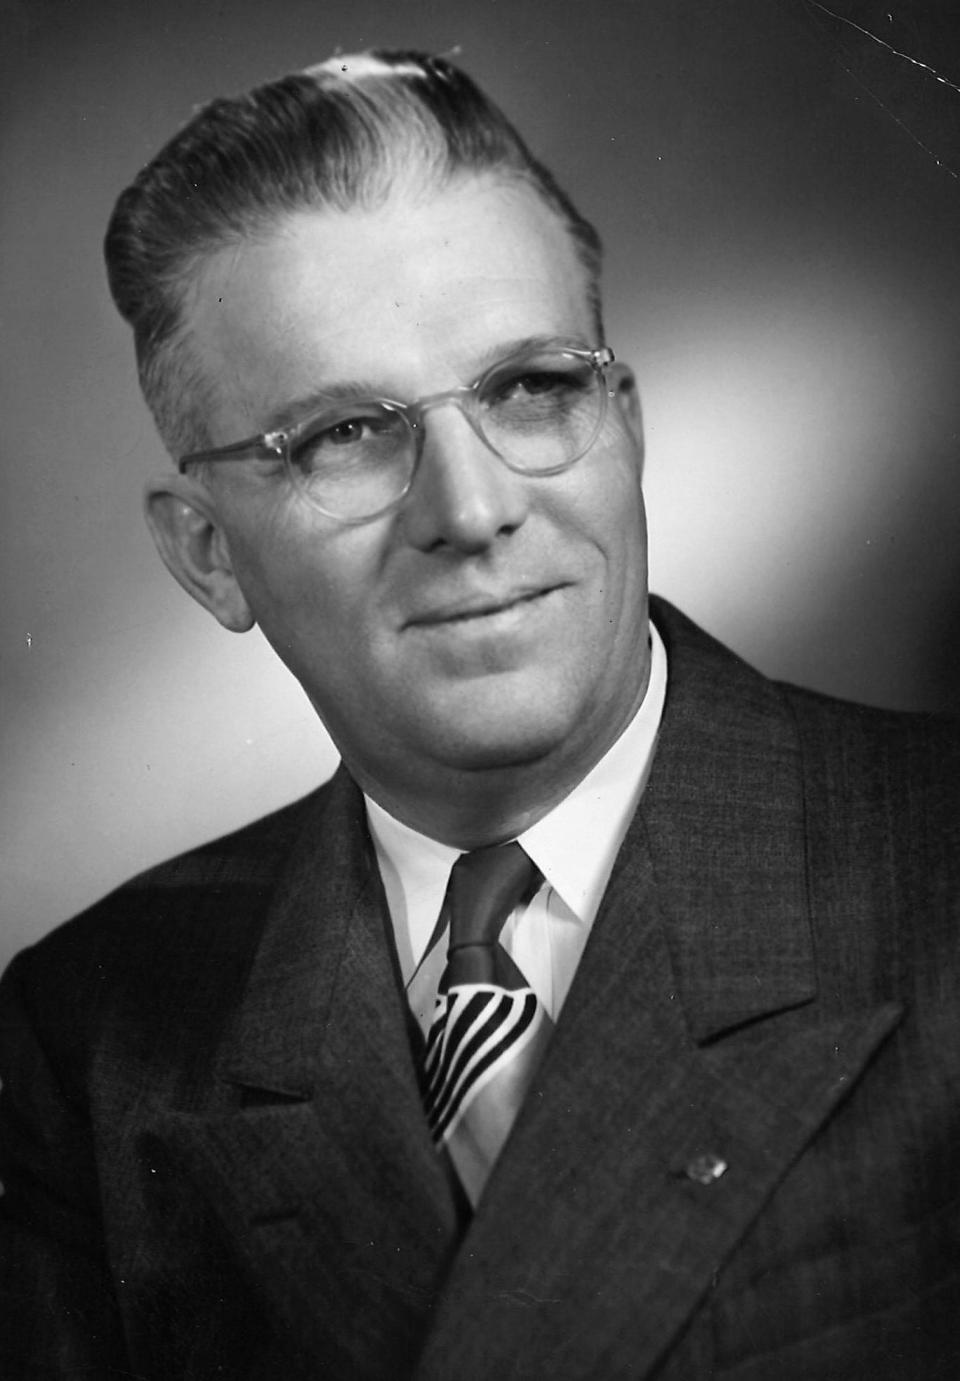 Horace Condley, photographed in 1951 as he was ending seven years on the Abilene ISD board of trustees. Community service has been a hallmark of the downtown CPA firm.